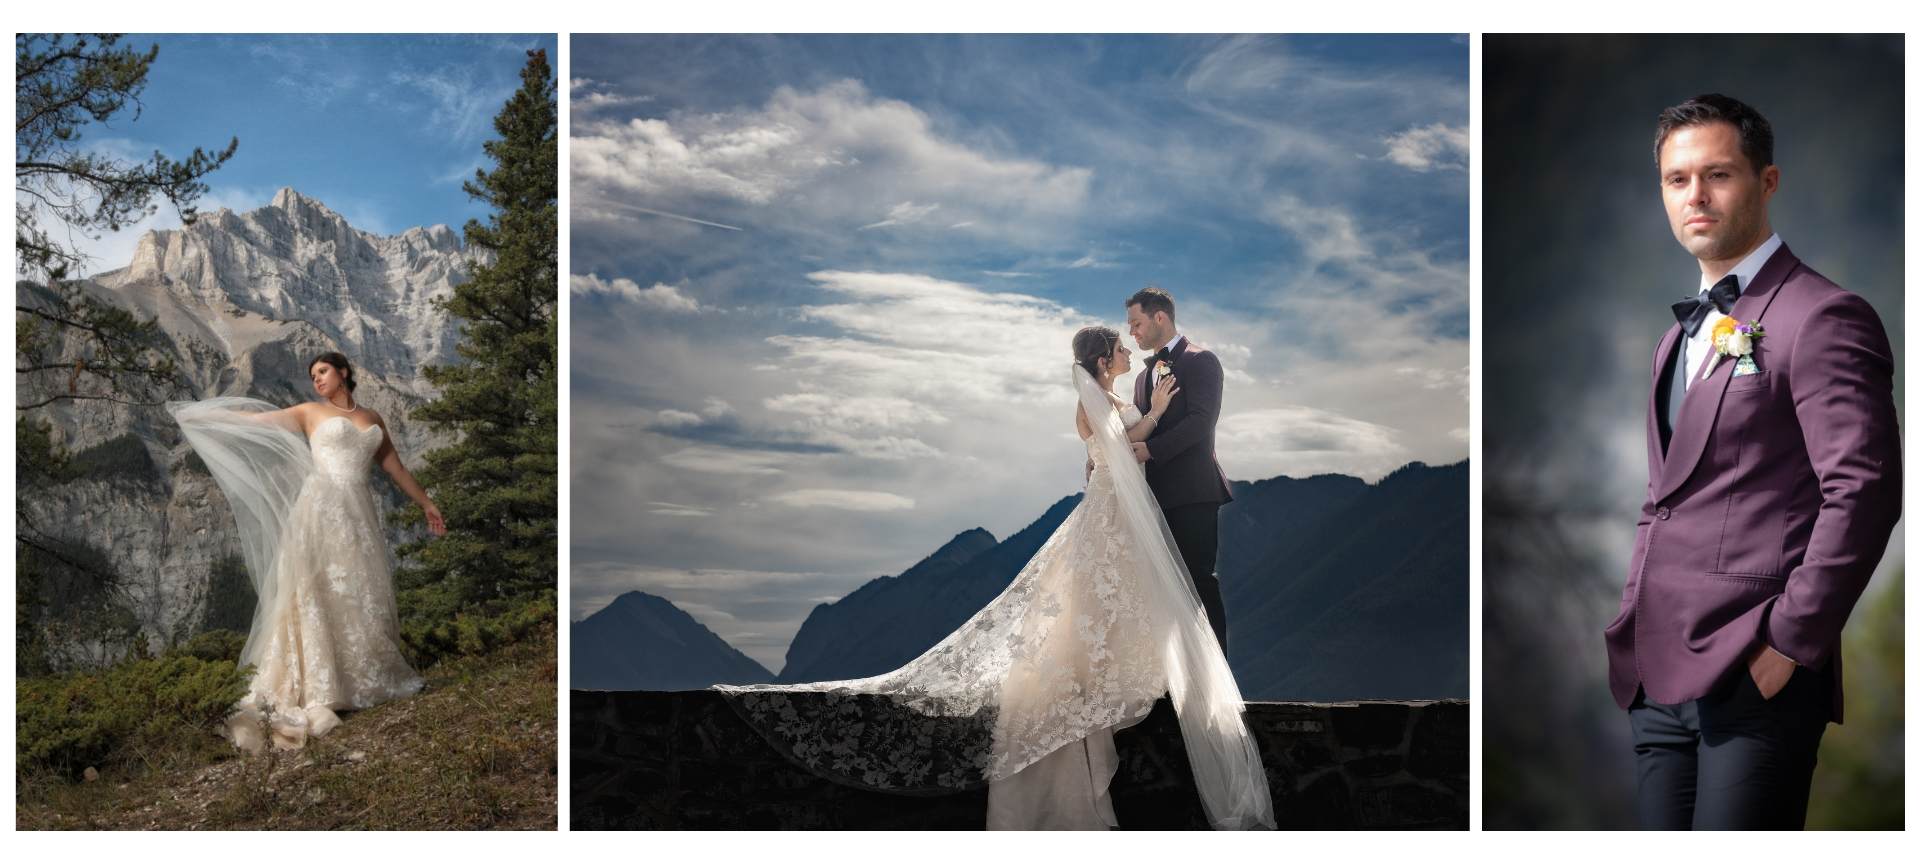 elope to banff national park in canda - rocky mountains wedding